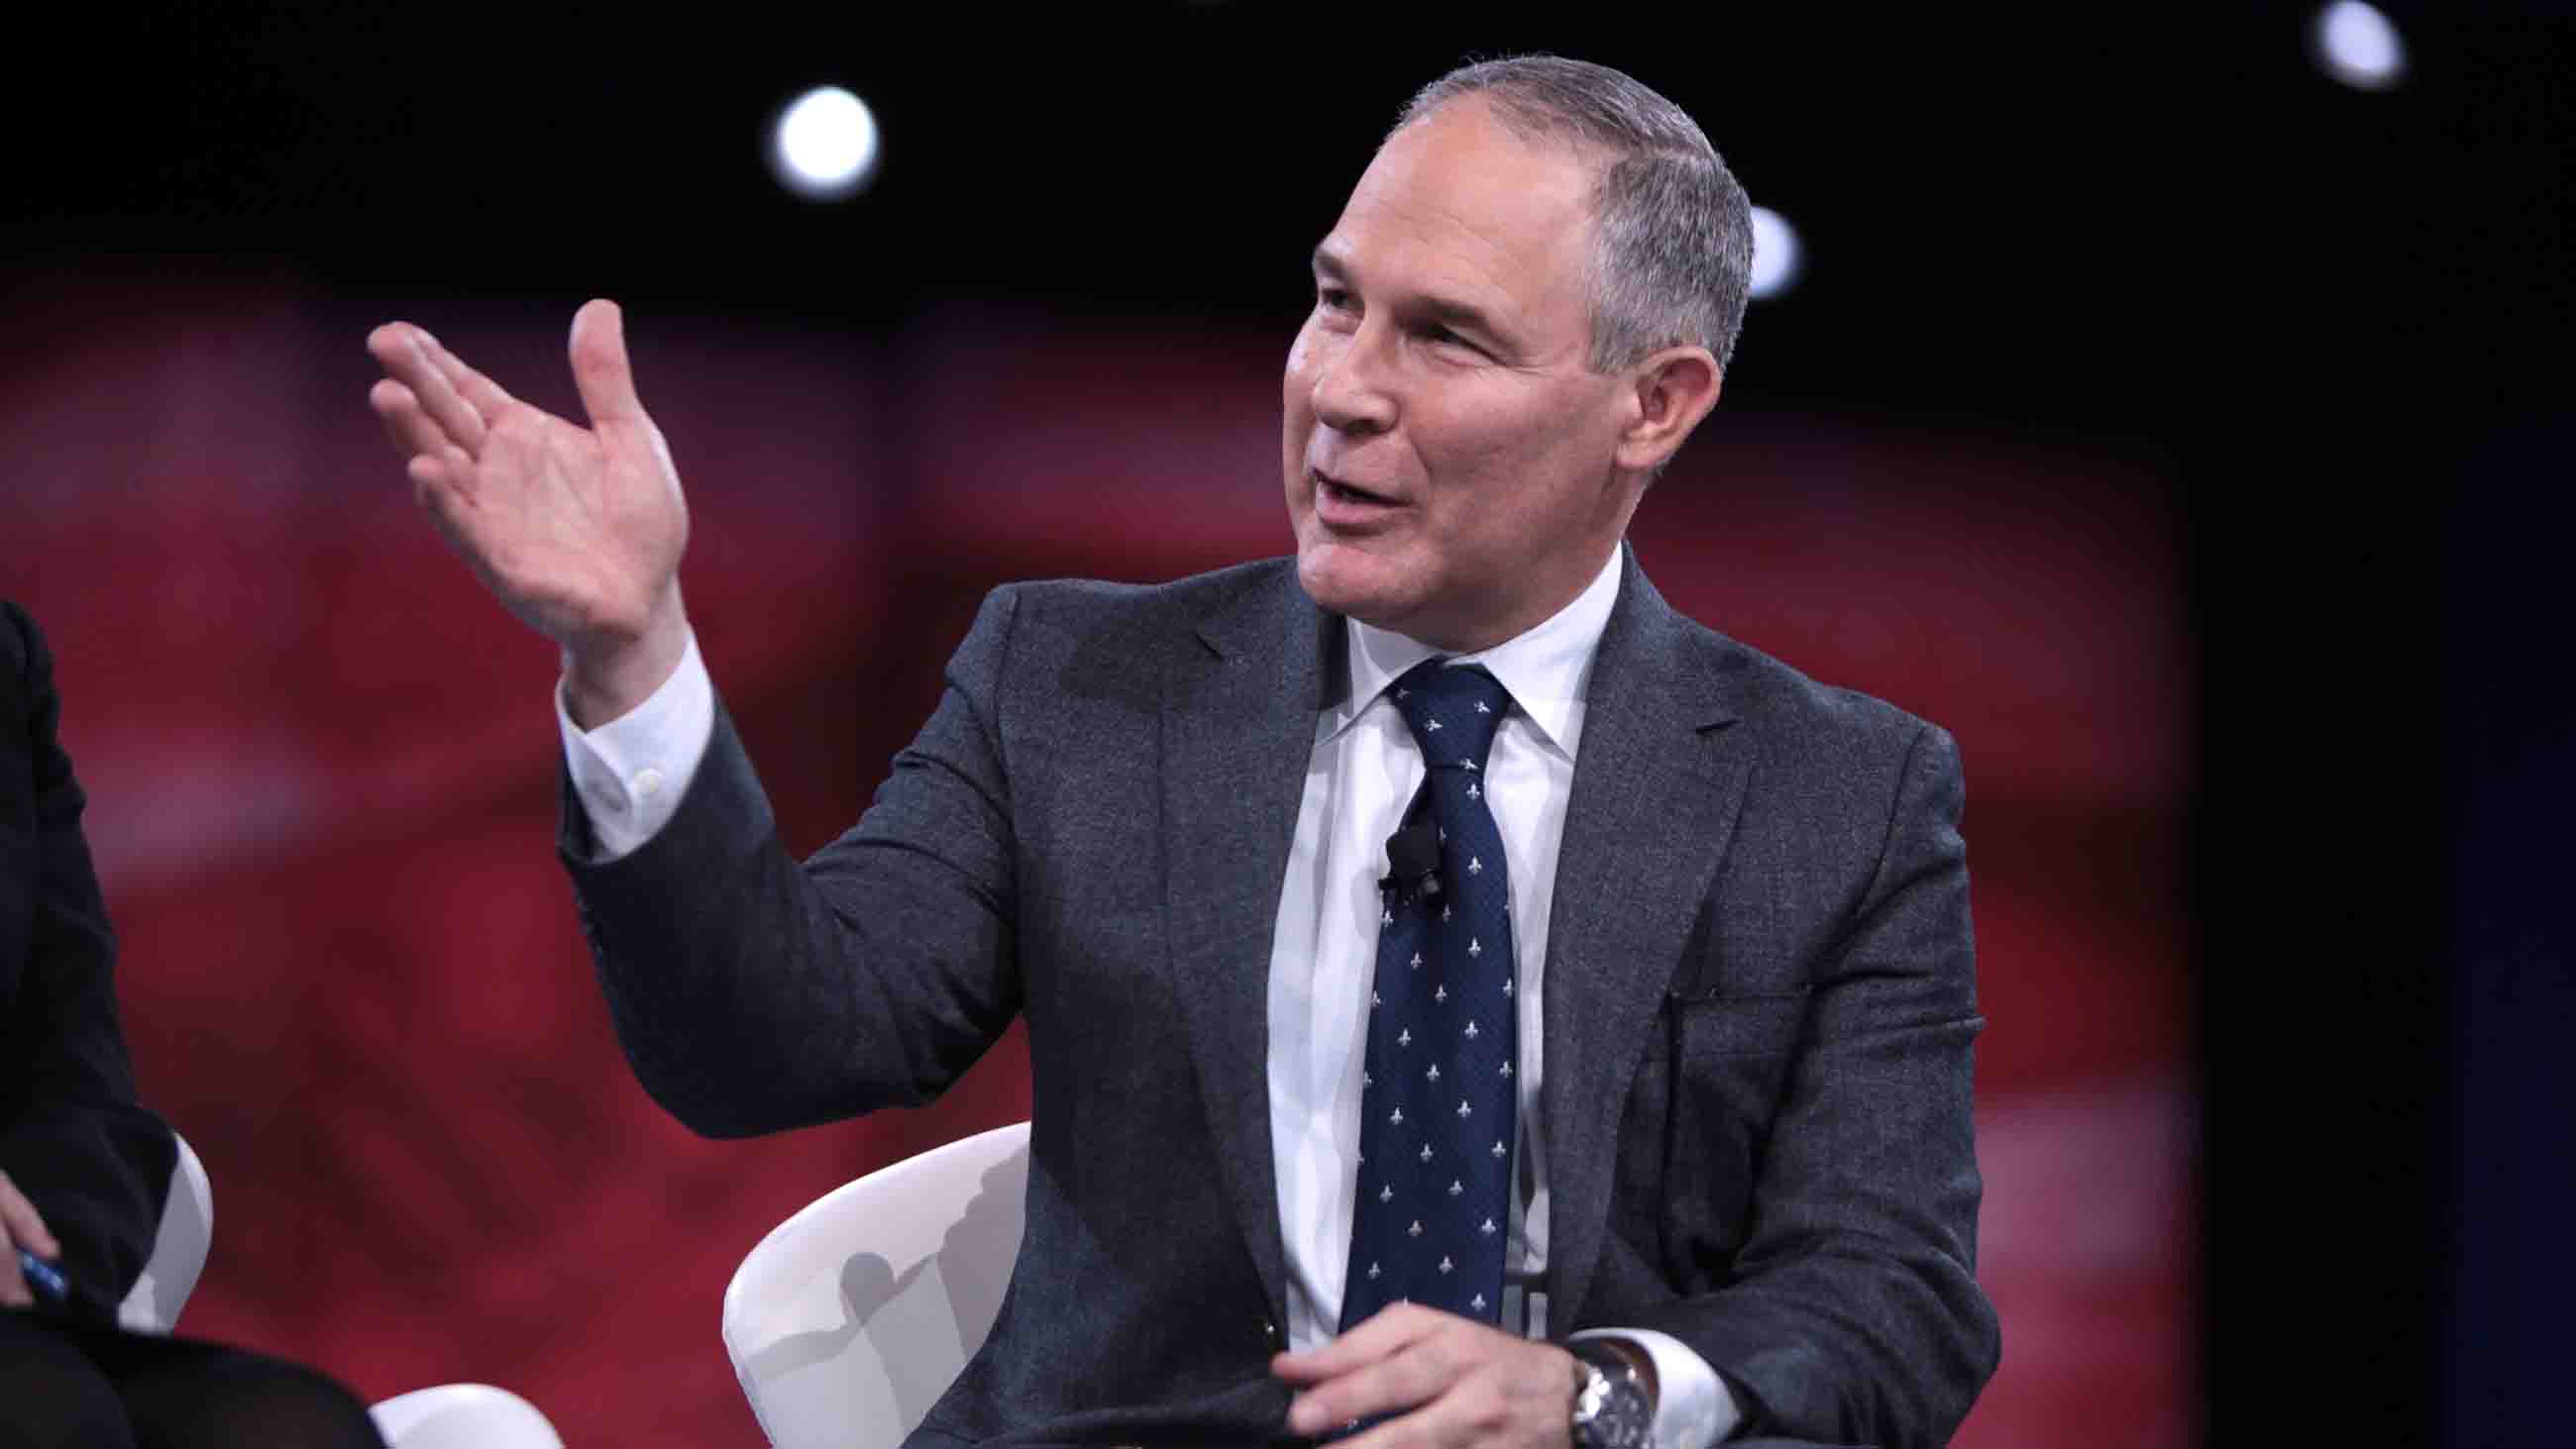 Scott Pruitt says his proposed policy change is a push for more transparency in research. Critics say its an attack on science.